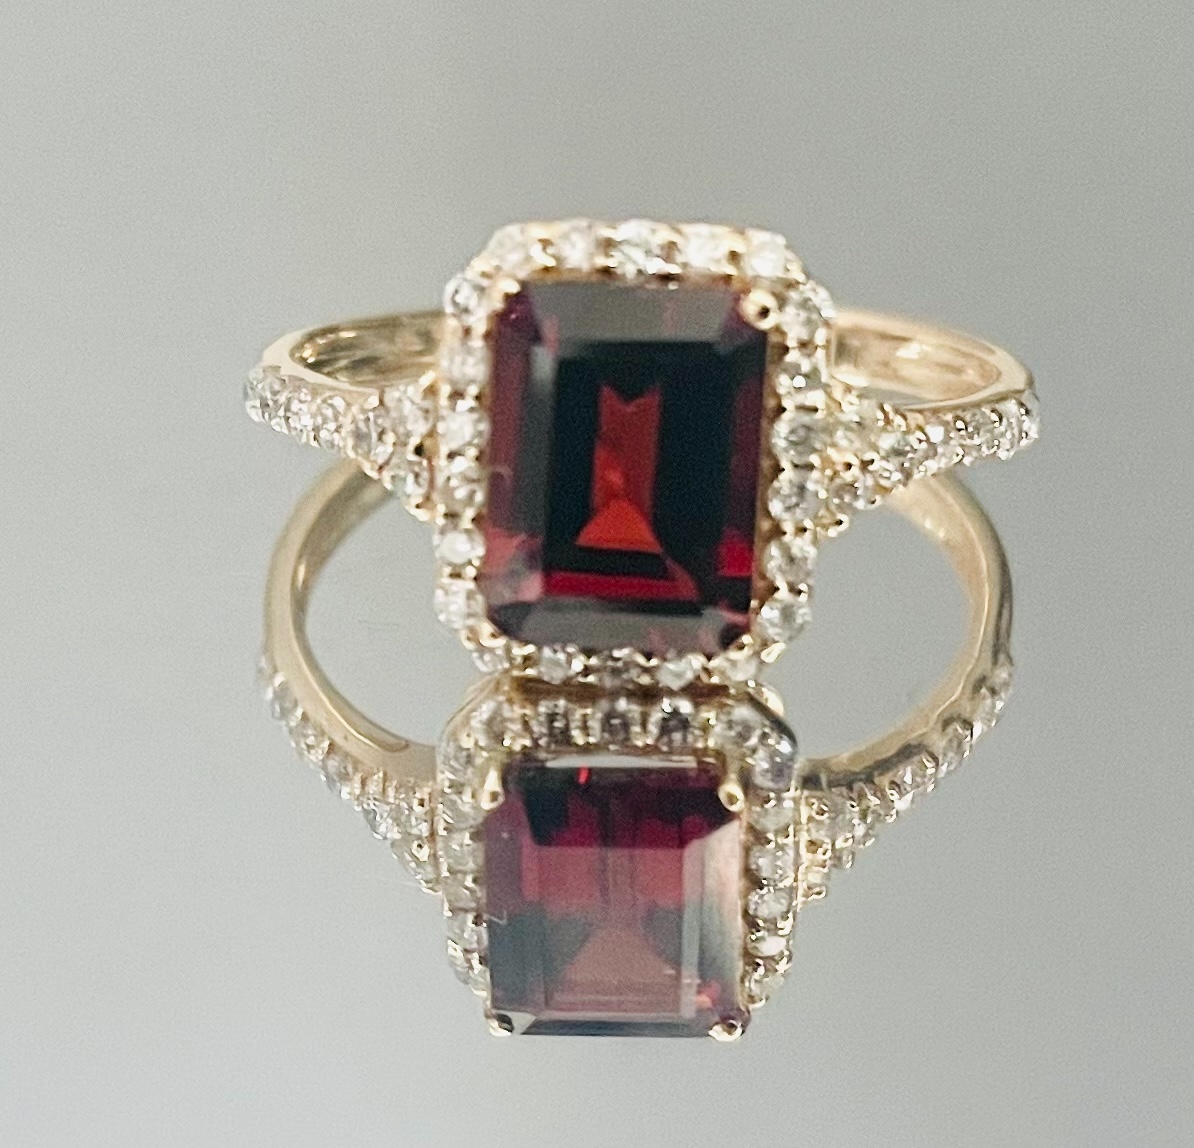 Beautiful Natural Garnet Ring With Diamonds And 18k Gold